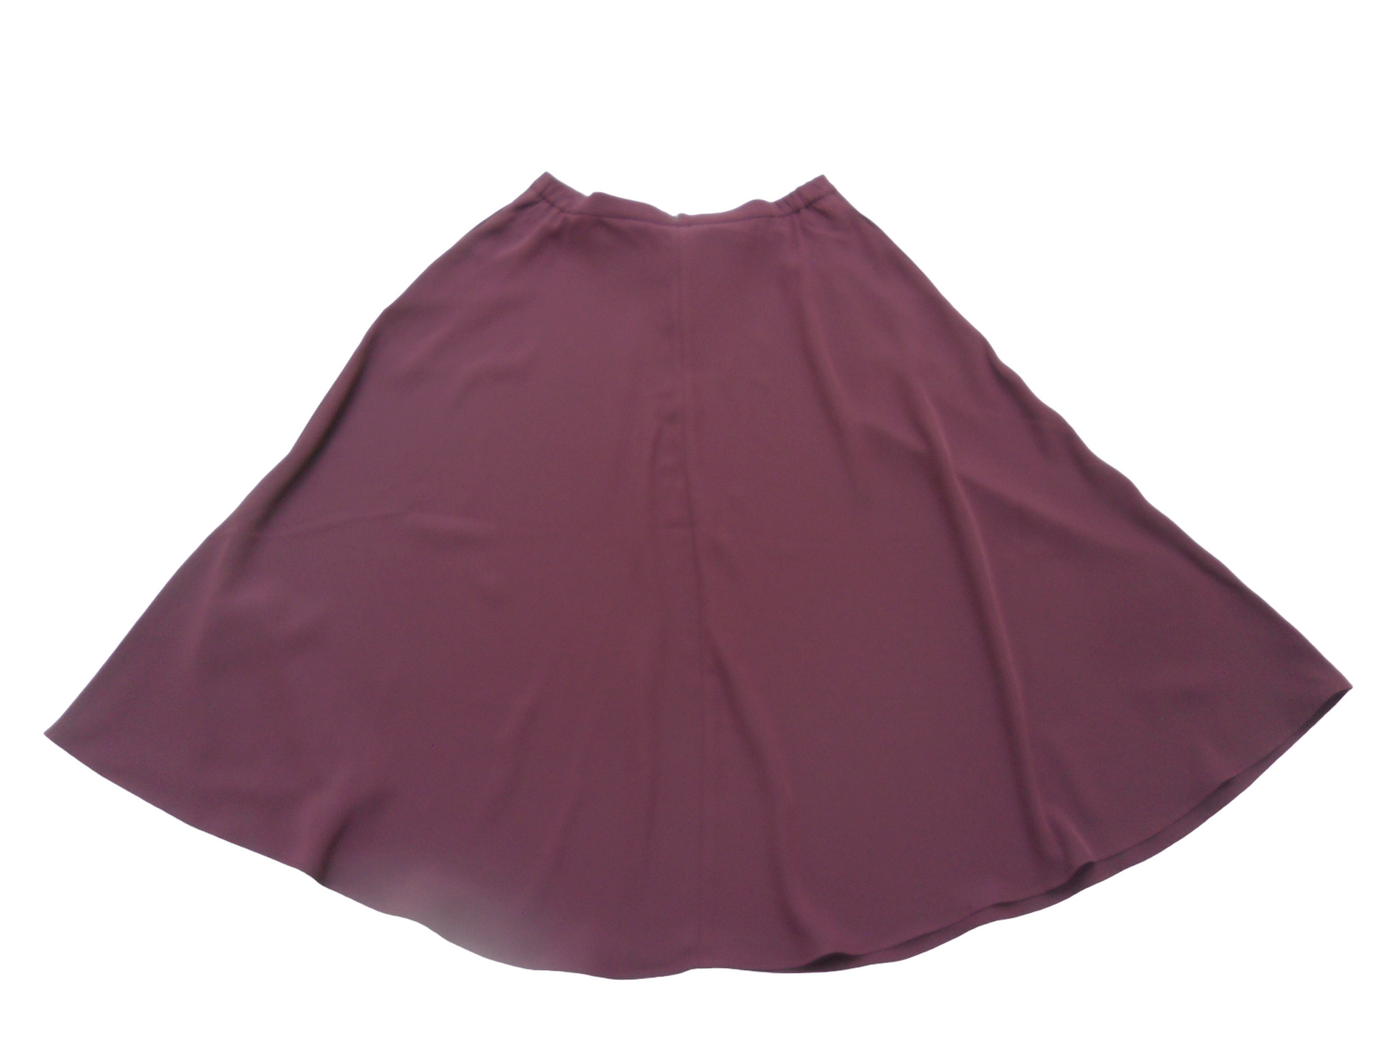 Vintage UNIQLO Maroon, Polyester, Ladies Middy Skirt Size-M